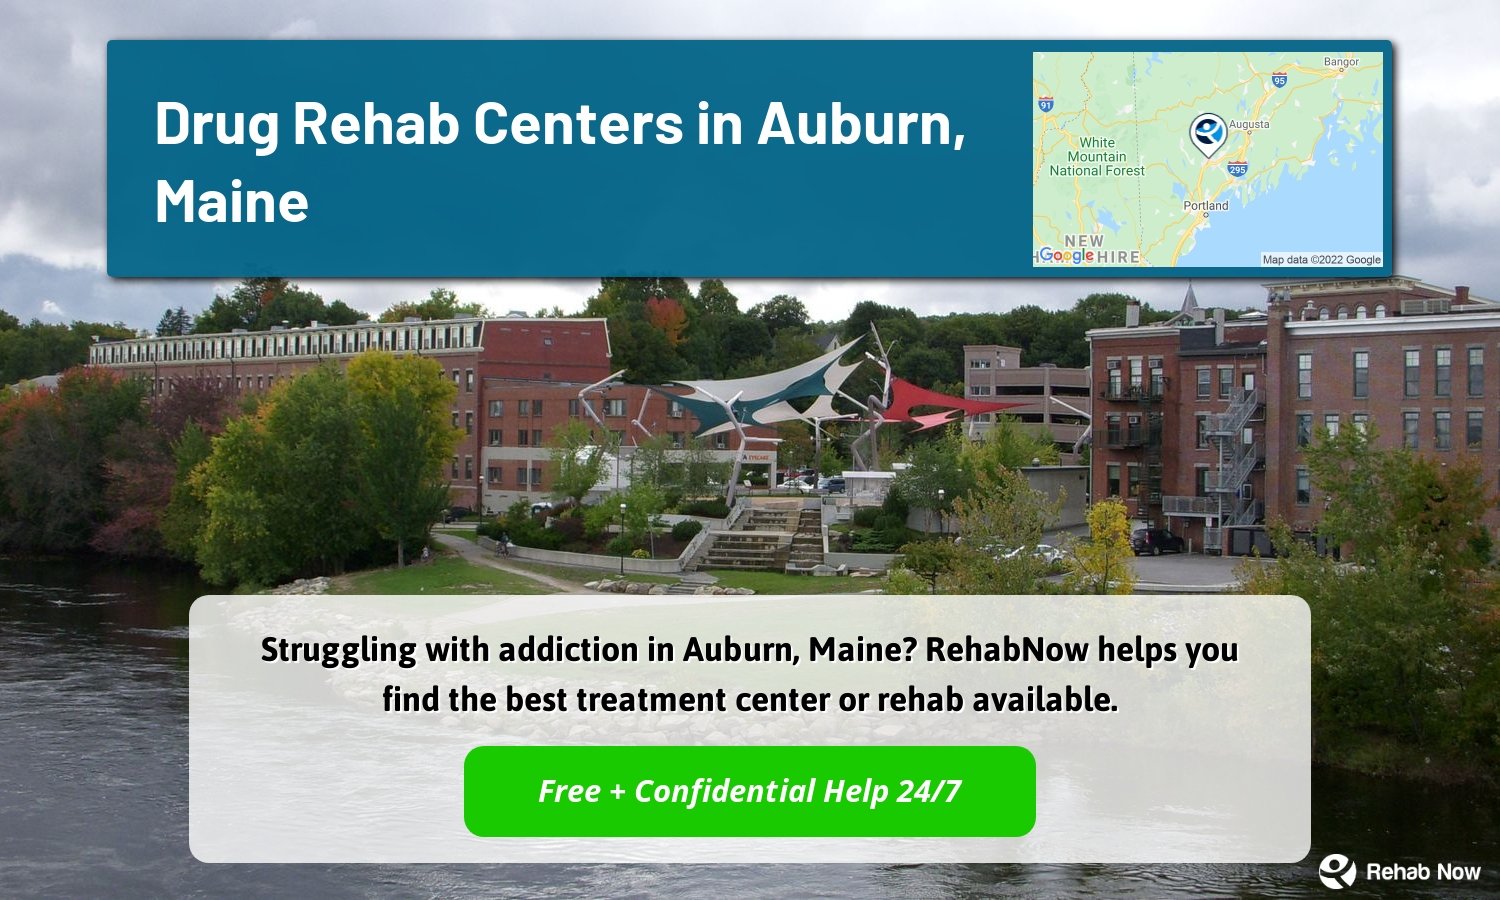 Struggling with addiction in Auburn, Maine? RehabNow helps you find the best treatment center or rehab available.